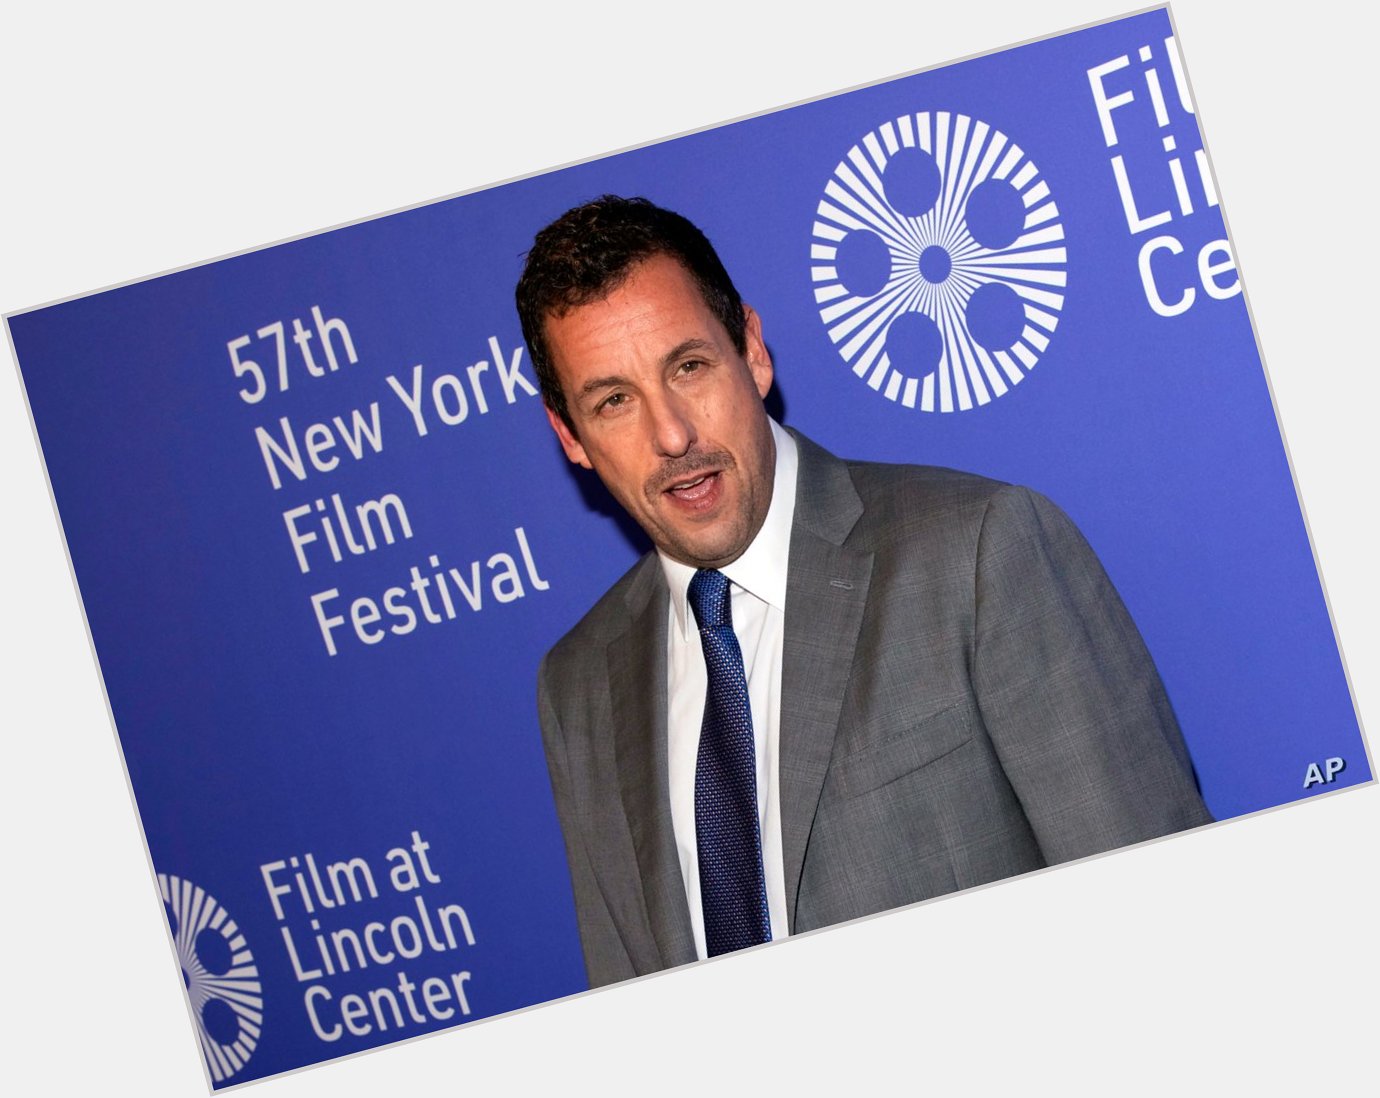 Happy 55th birthday to Adam Sandler!

What do you think is the best quote from the actor across his films? 